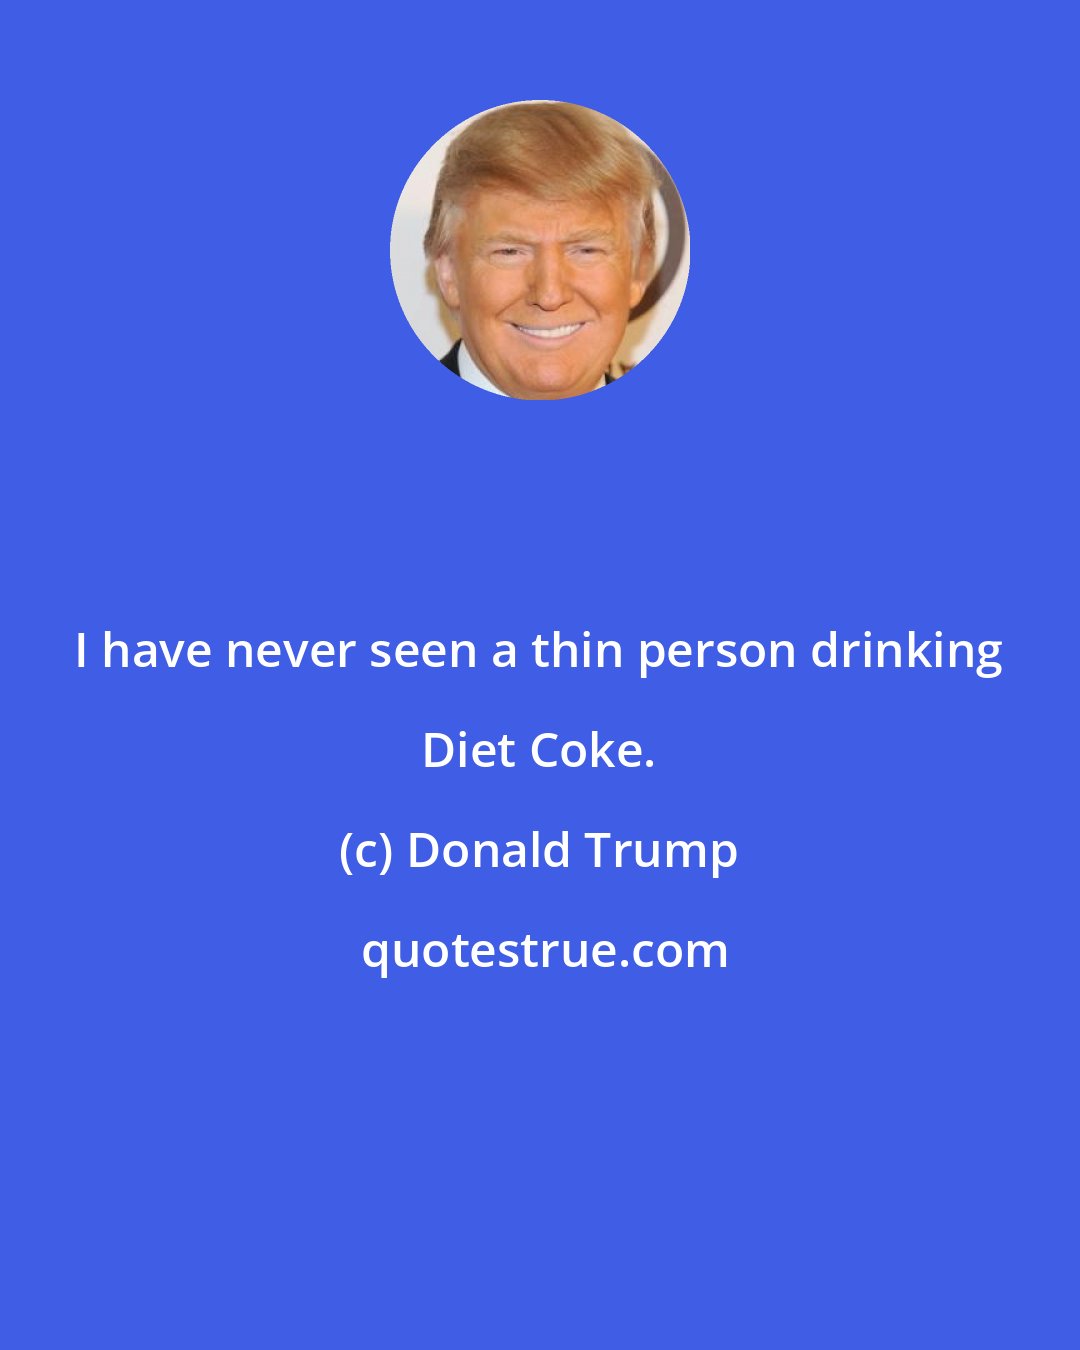 Donald Trump: I have never seen a thin person drinking Diet Coke.